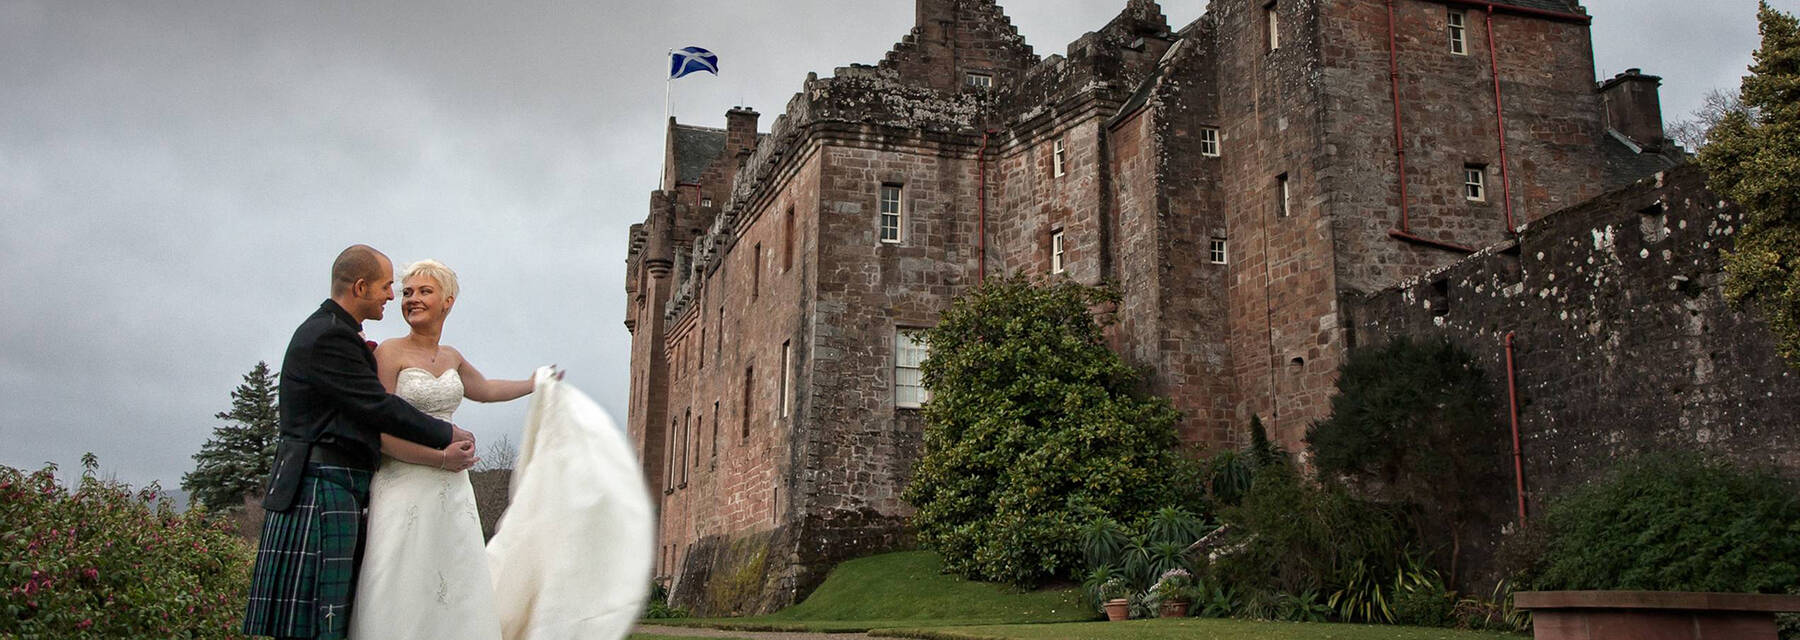 A wedding couple stand on the grassy slope outside Brodick Castle. The groom has his hands on the bride’s waist; she is holding her white dress fanned out to one side.